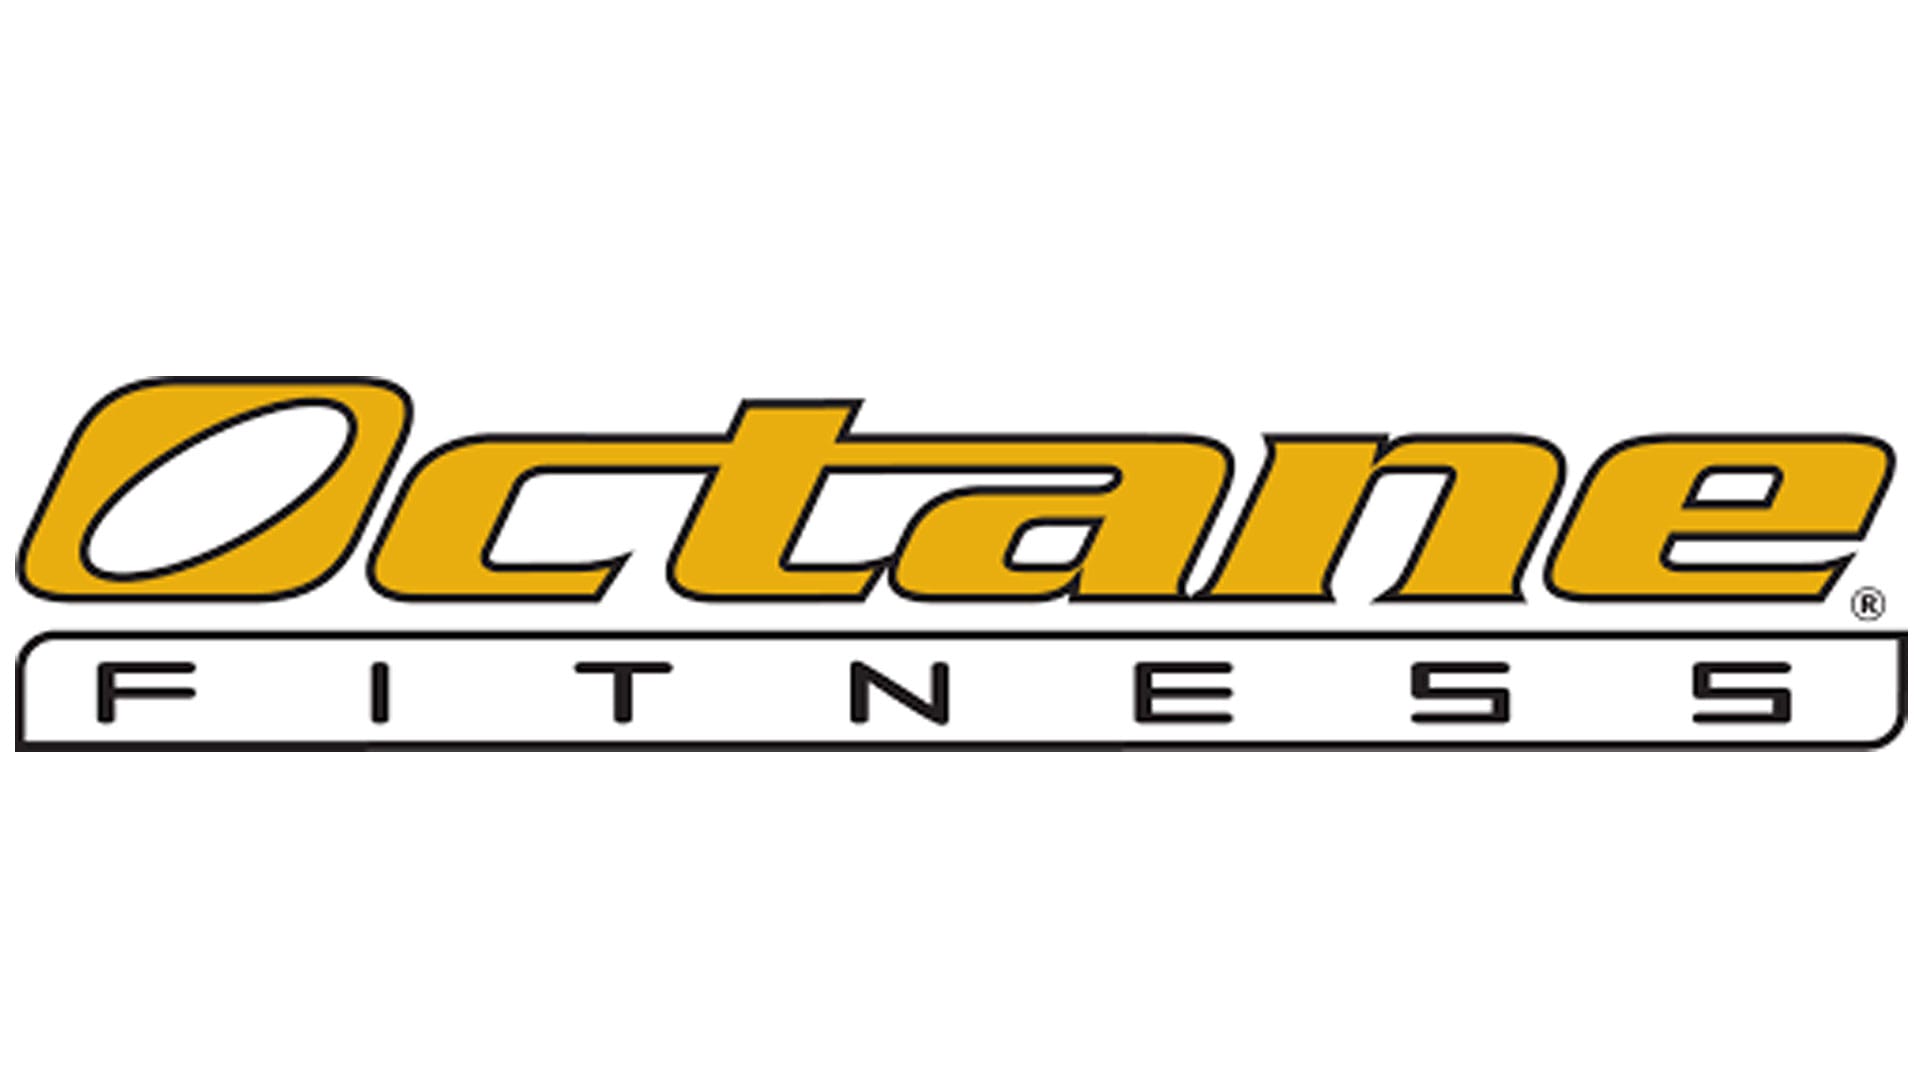 A yellow and white logo for octane fitness.